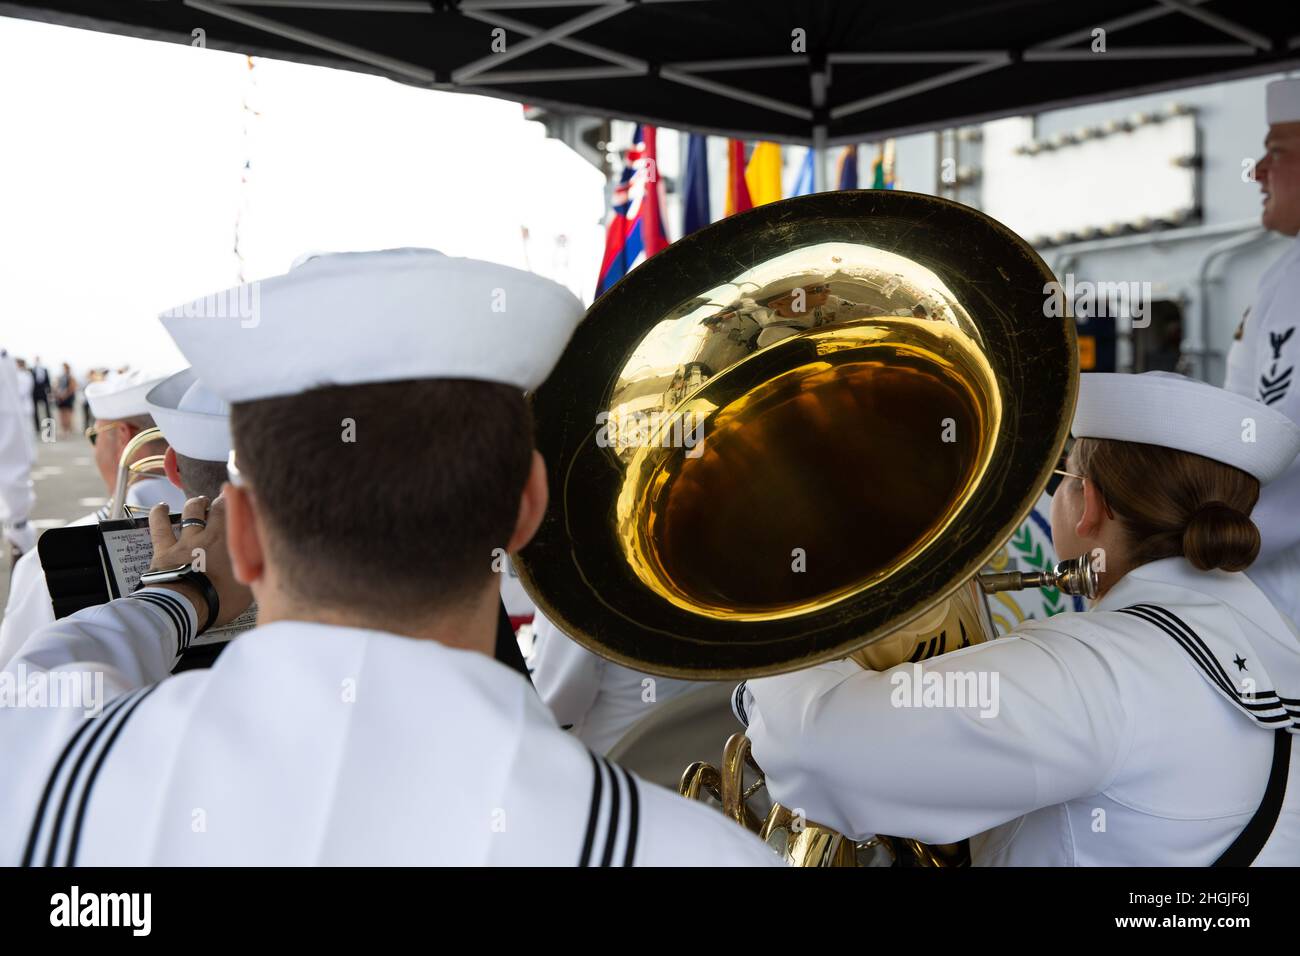 SAN DIEGO (Aug. 19, 2021) Sailors assigned to the Navy Band Commander, Navy Region Southwest, prepare to play music during a change of command ceremony aboard the aircraft carrier USS Abraham Lincoln (CVN 72). Capt. Walt “Sarge” Slaughter successfully completed his 26 month tour as commanding officer during which Abraham Lincoln completed a 10-month combat deployment, the largest carrier work package ever completed in San Diego, and returned to sea in preparation for an upcoming deployment amidst the COVID-19 pandemic. Slaughter was relieved by Capt. Amy Bauernschmidt. Stock Photo